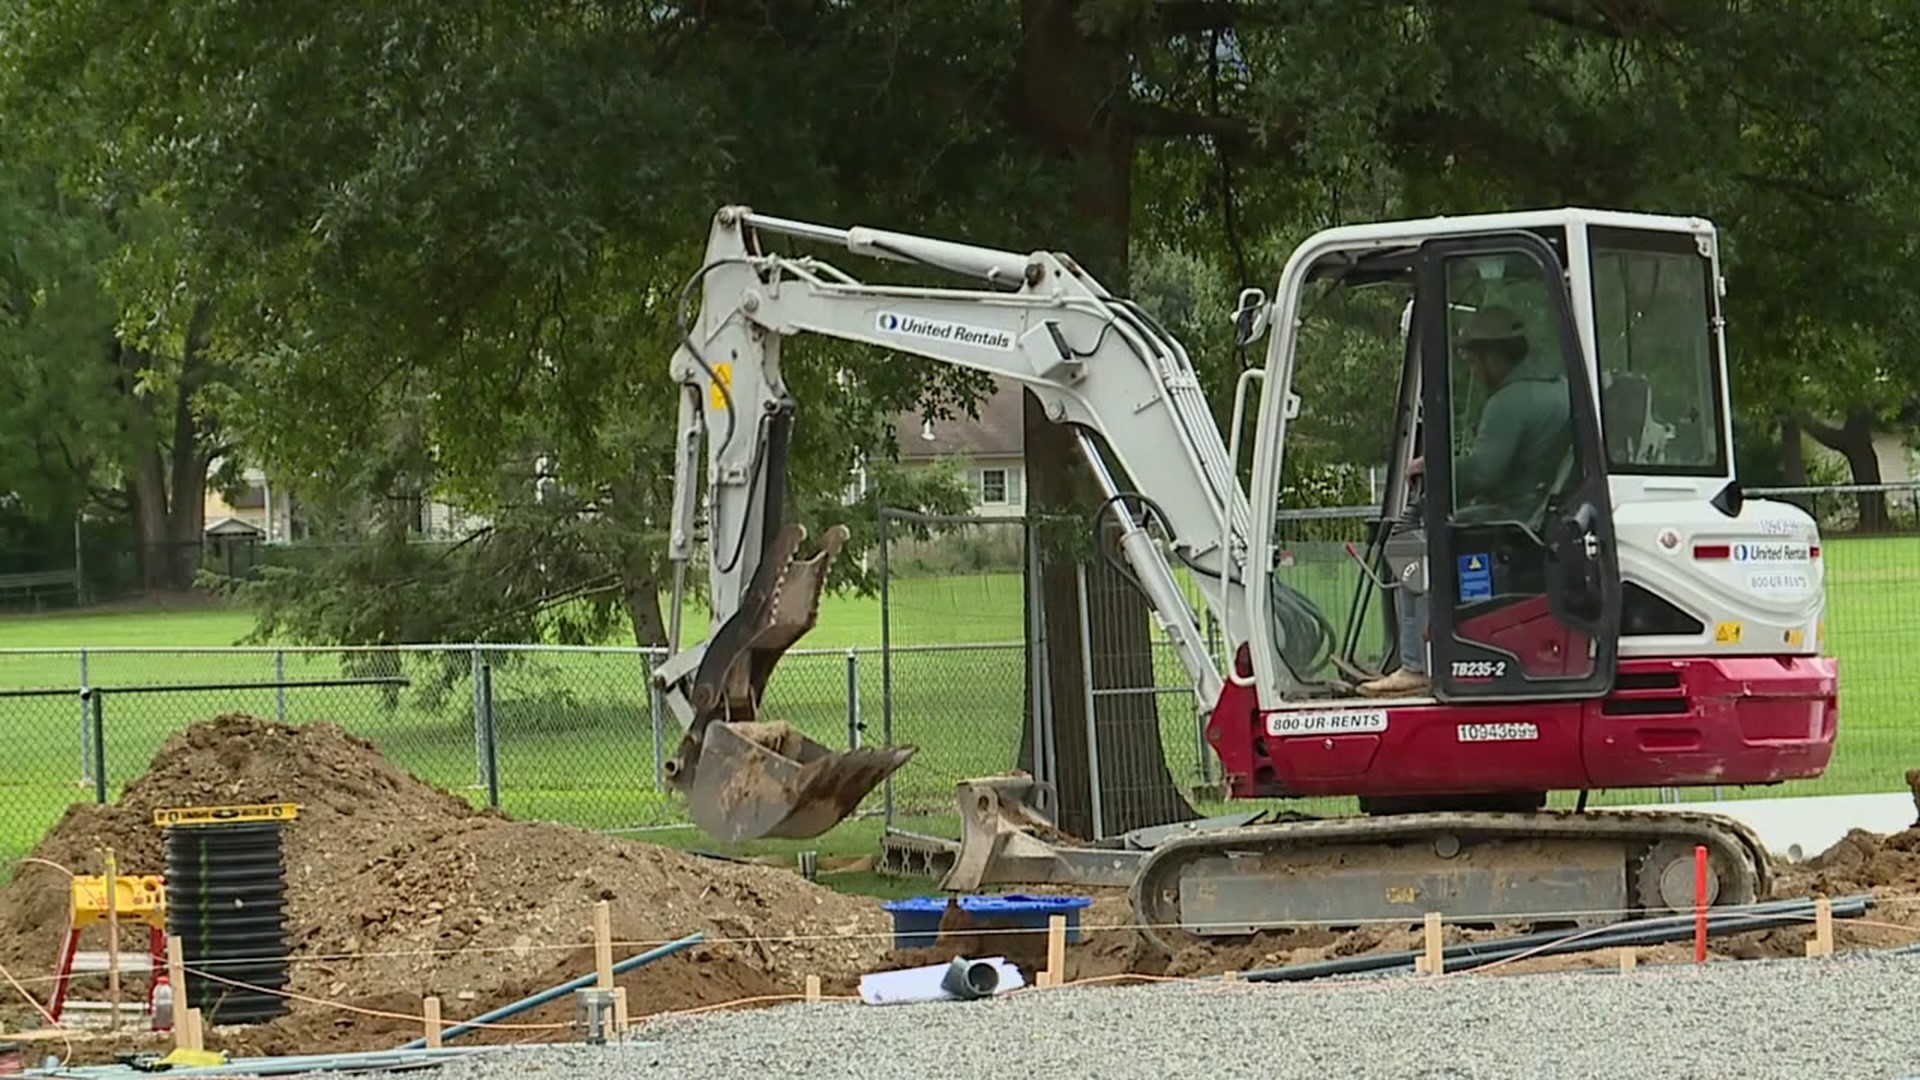 Three city parks in Williamsport are finally getting a facelift starting this week as construction begins on the athletic courts.